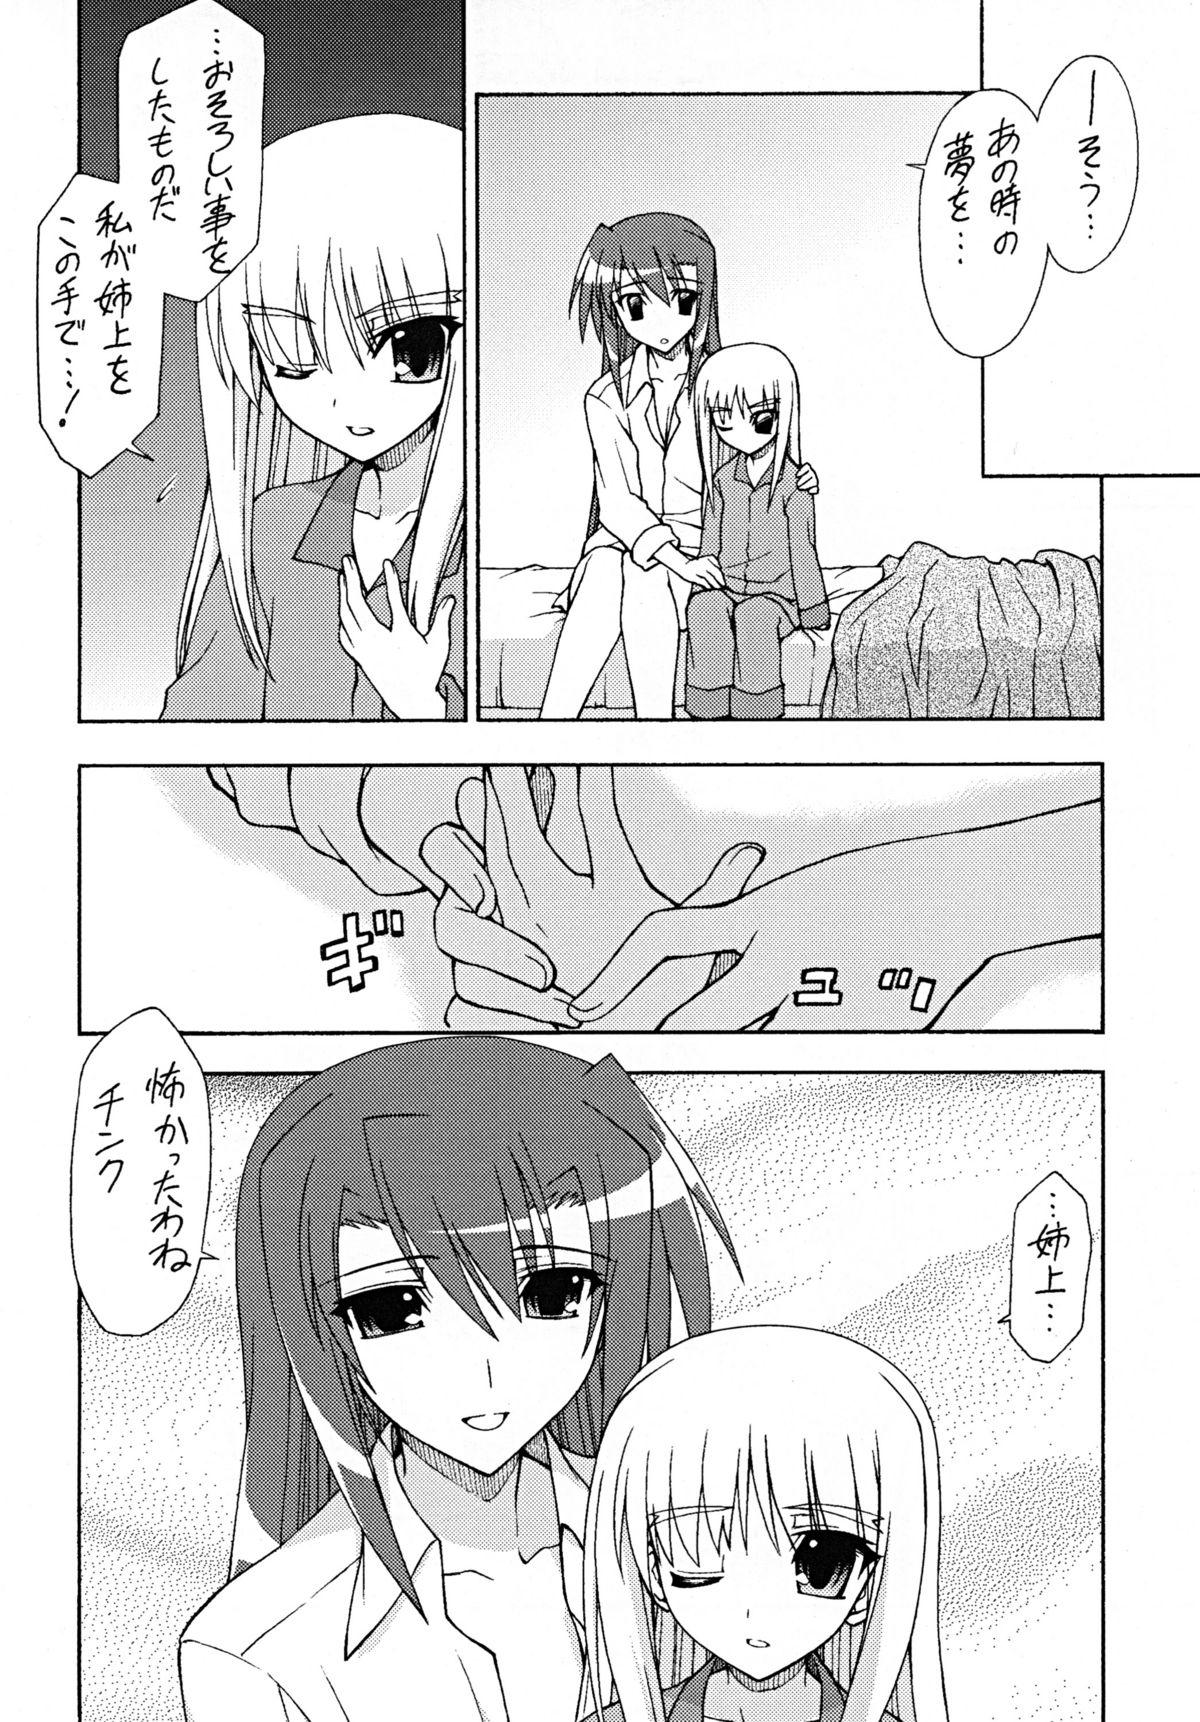 Creampie ANOTHER MORNING - Mahou shoujo lyrical nanoha Speculum - Page 7